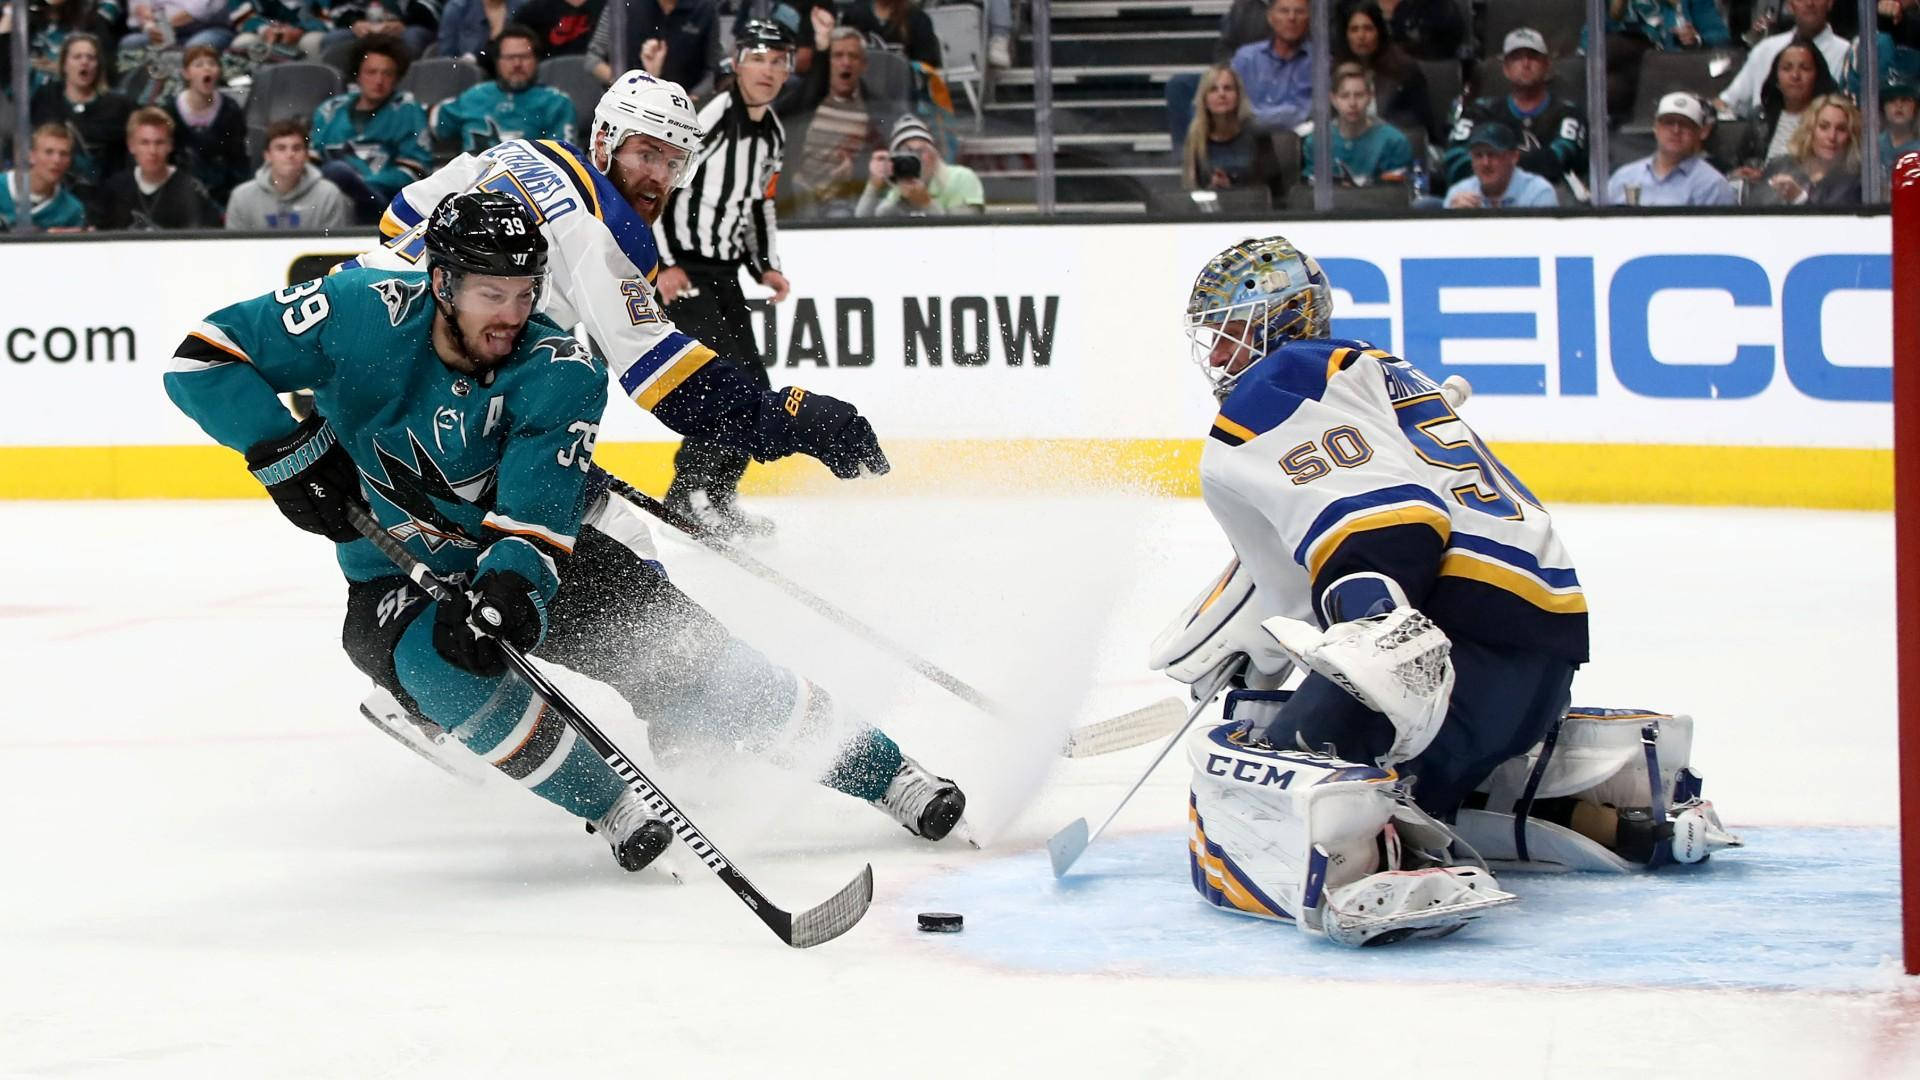 Ice Hockey Player Logan Couture Goal Against St. Louis Blues Wallpaper